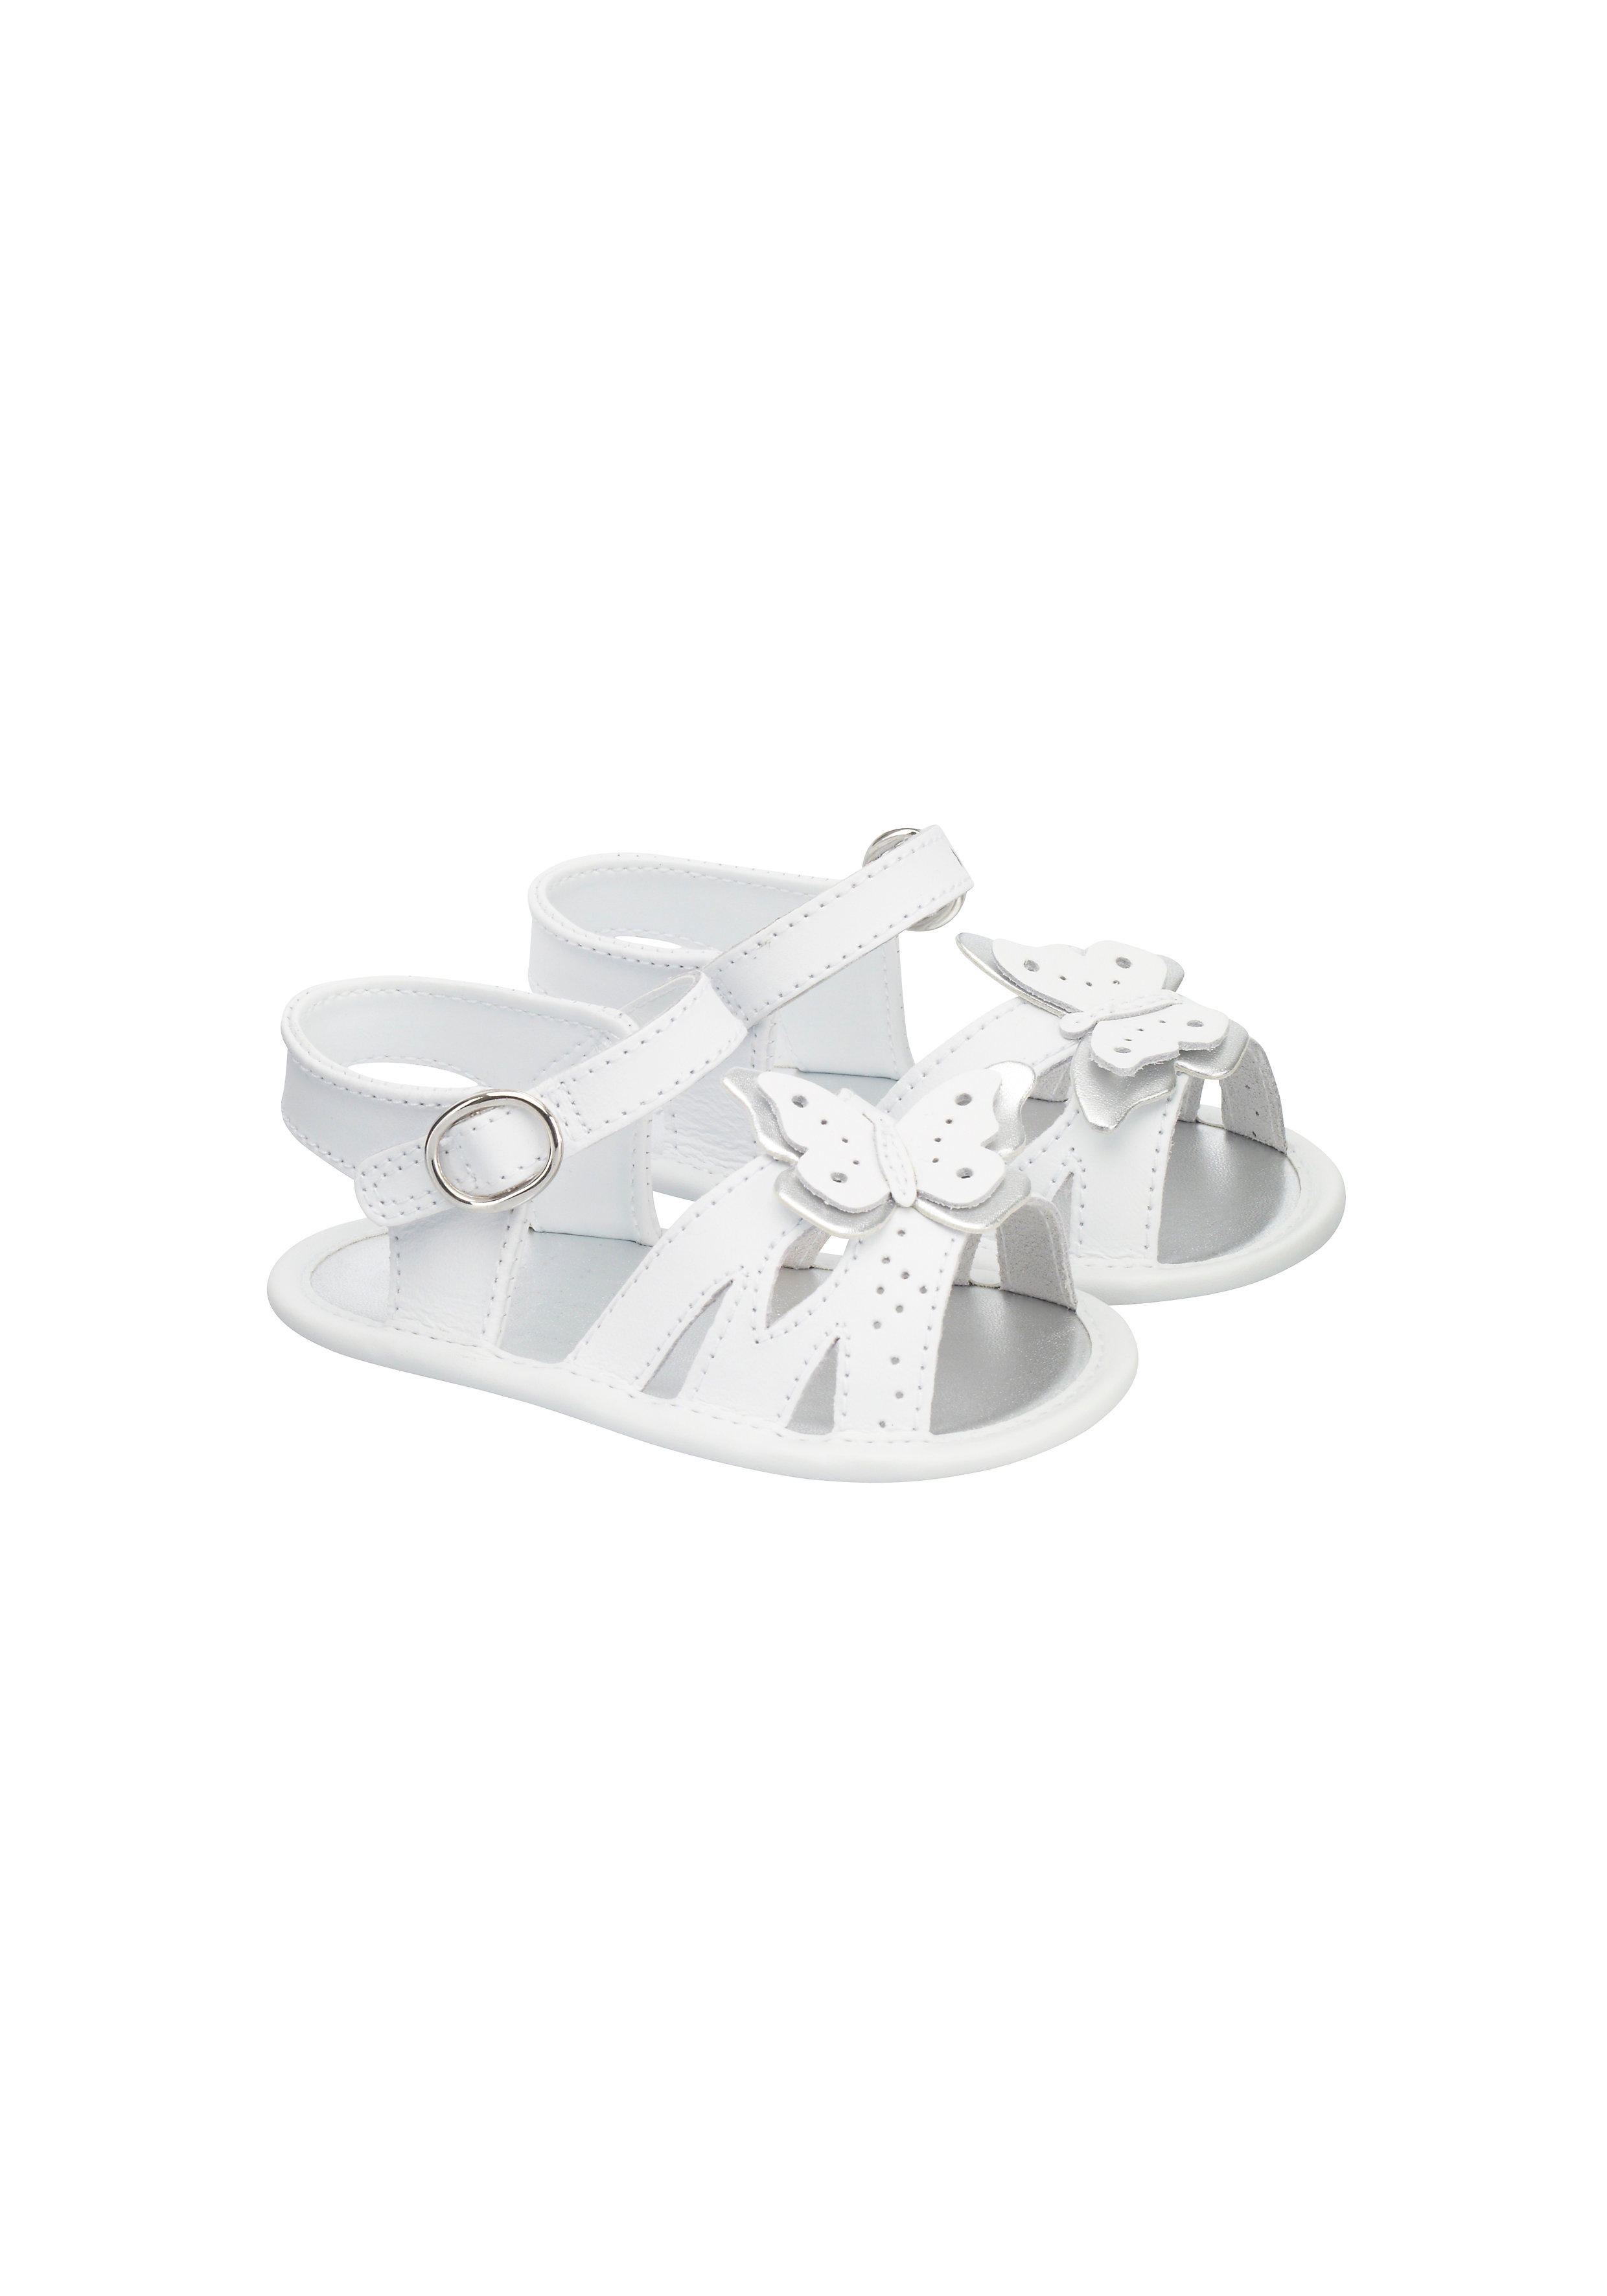 Mothercare | Girls Sandals - White